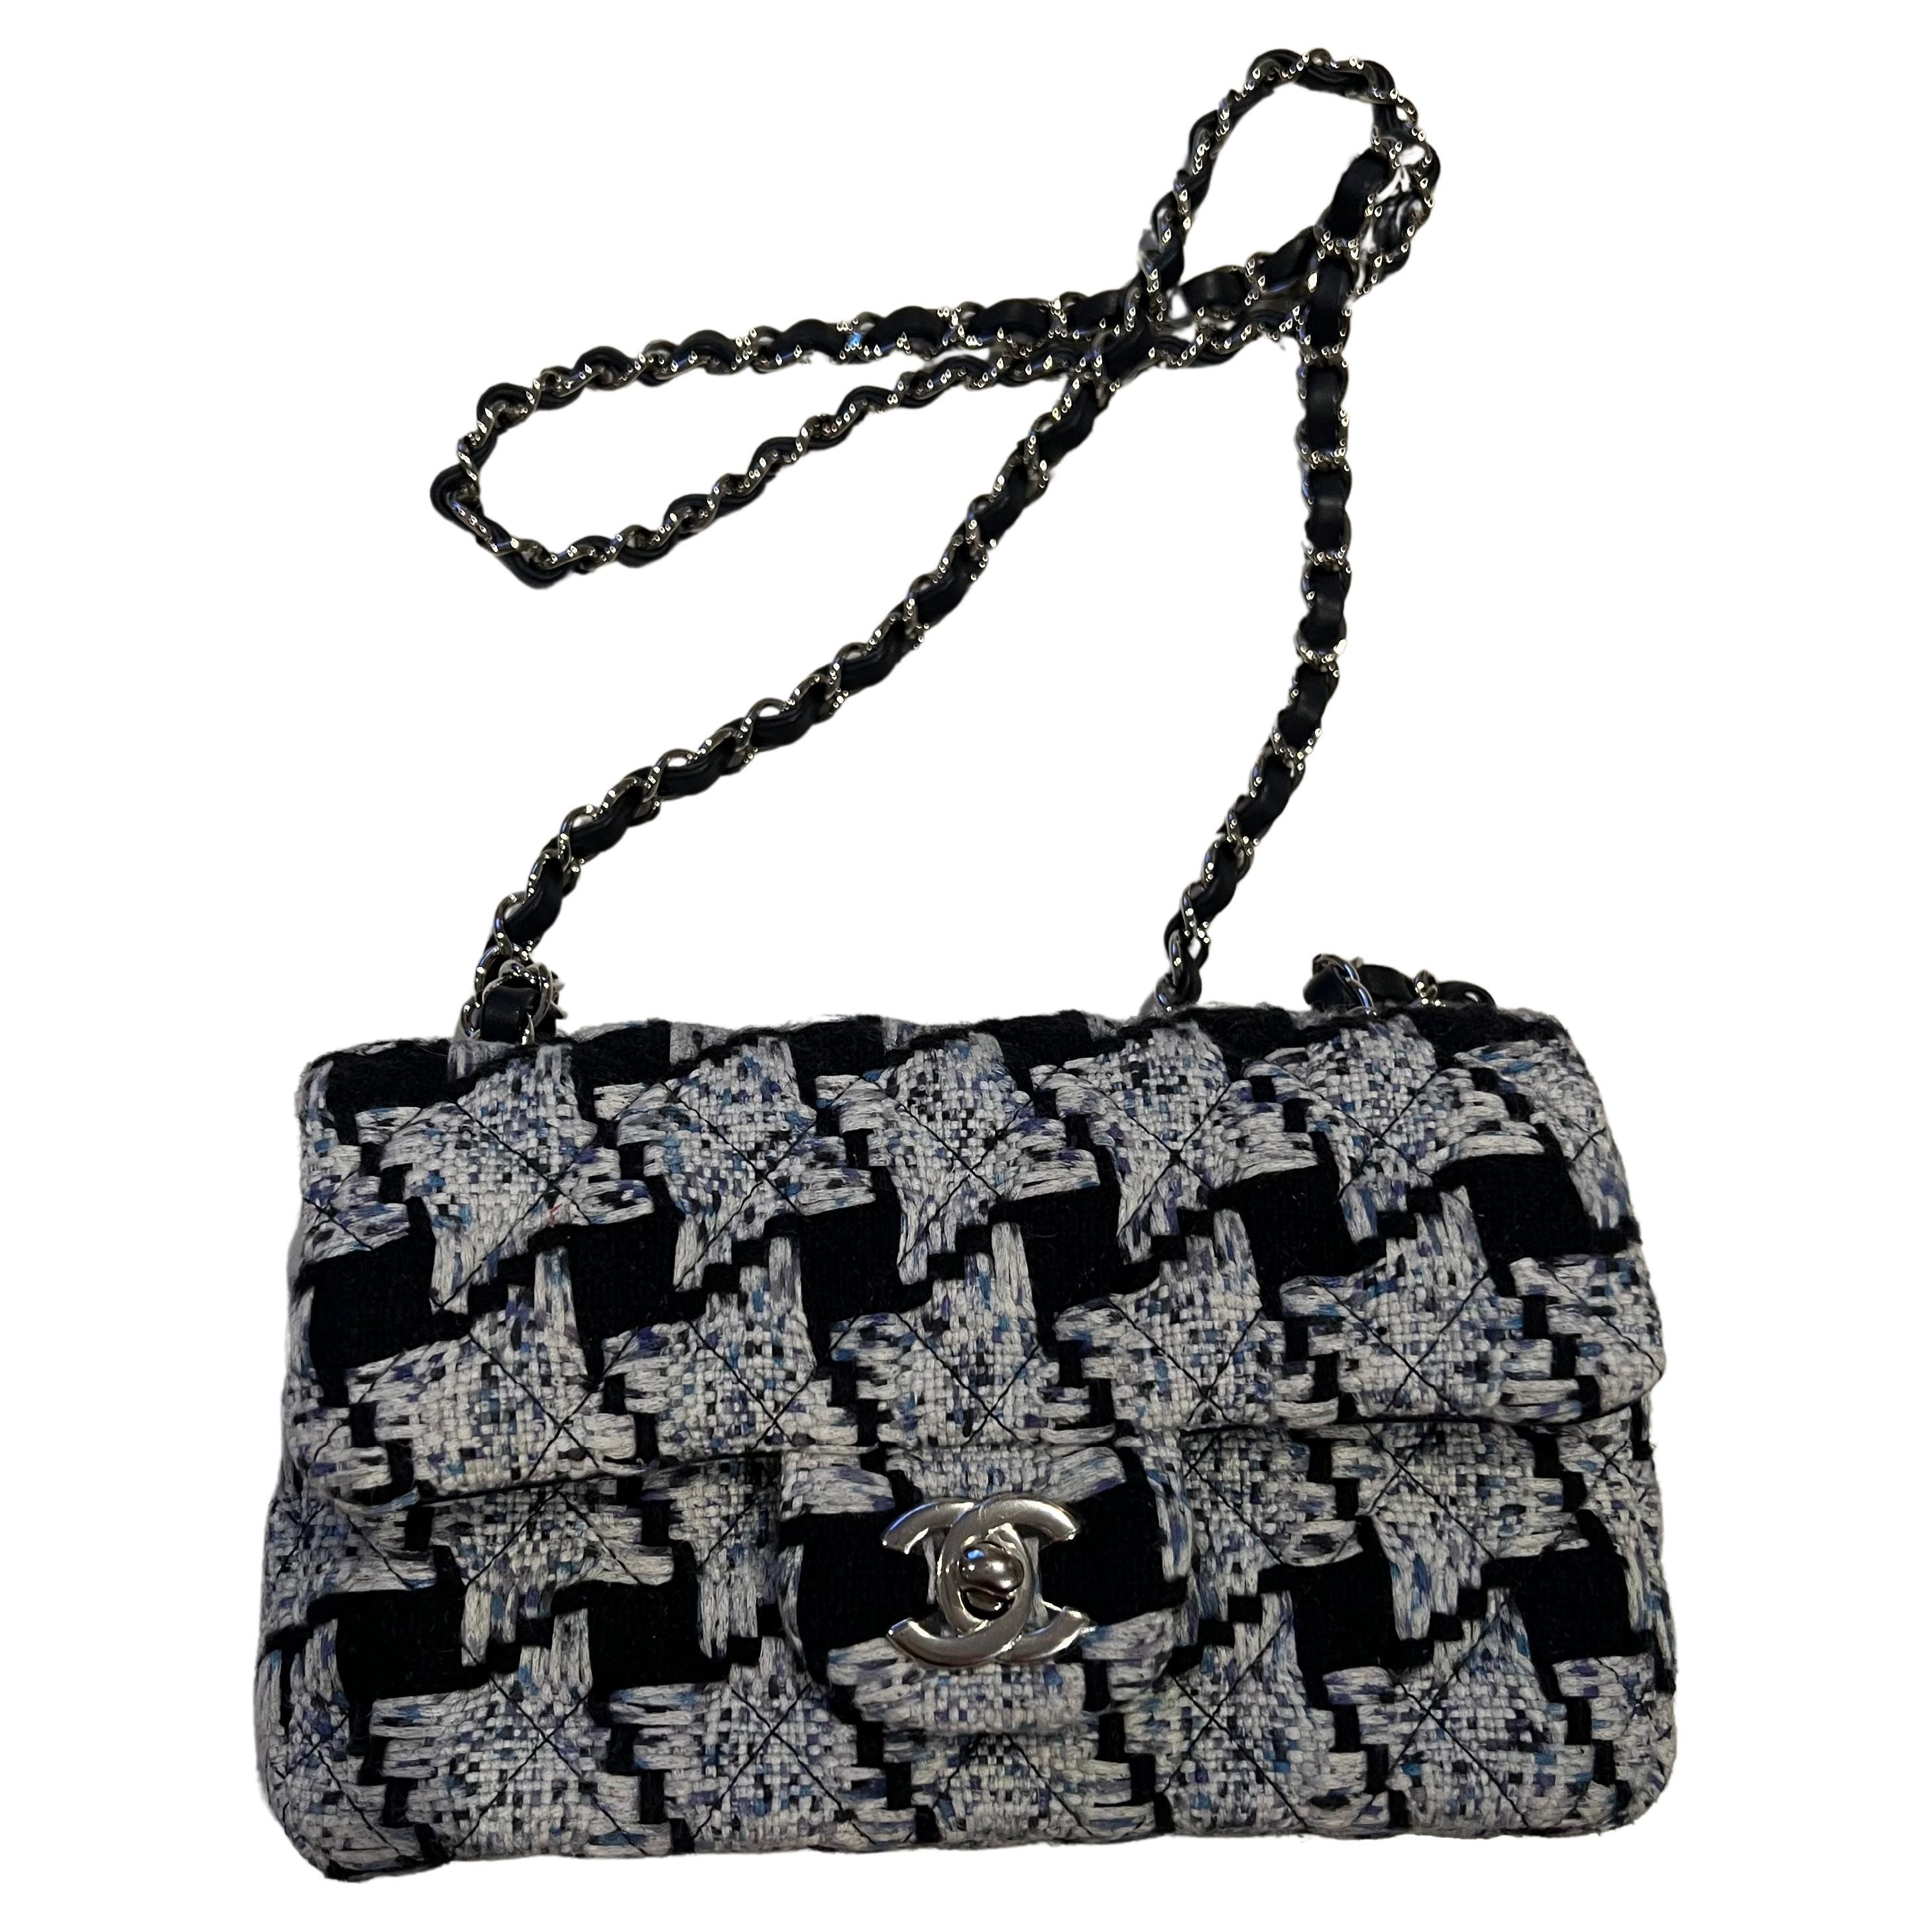 Chanel 20SS Houndstooth Tweed Mini Single Flap Bag in Blue and